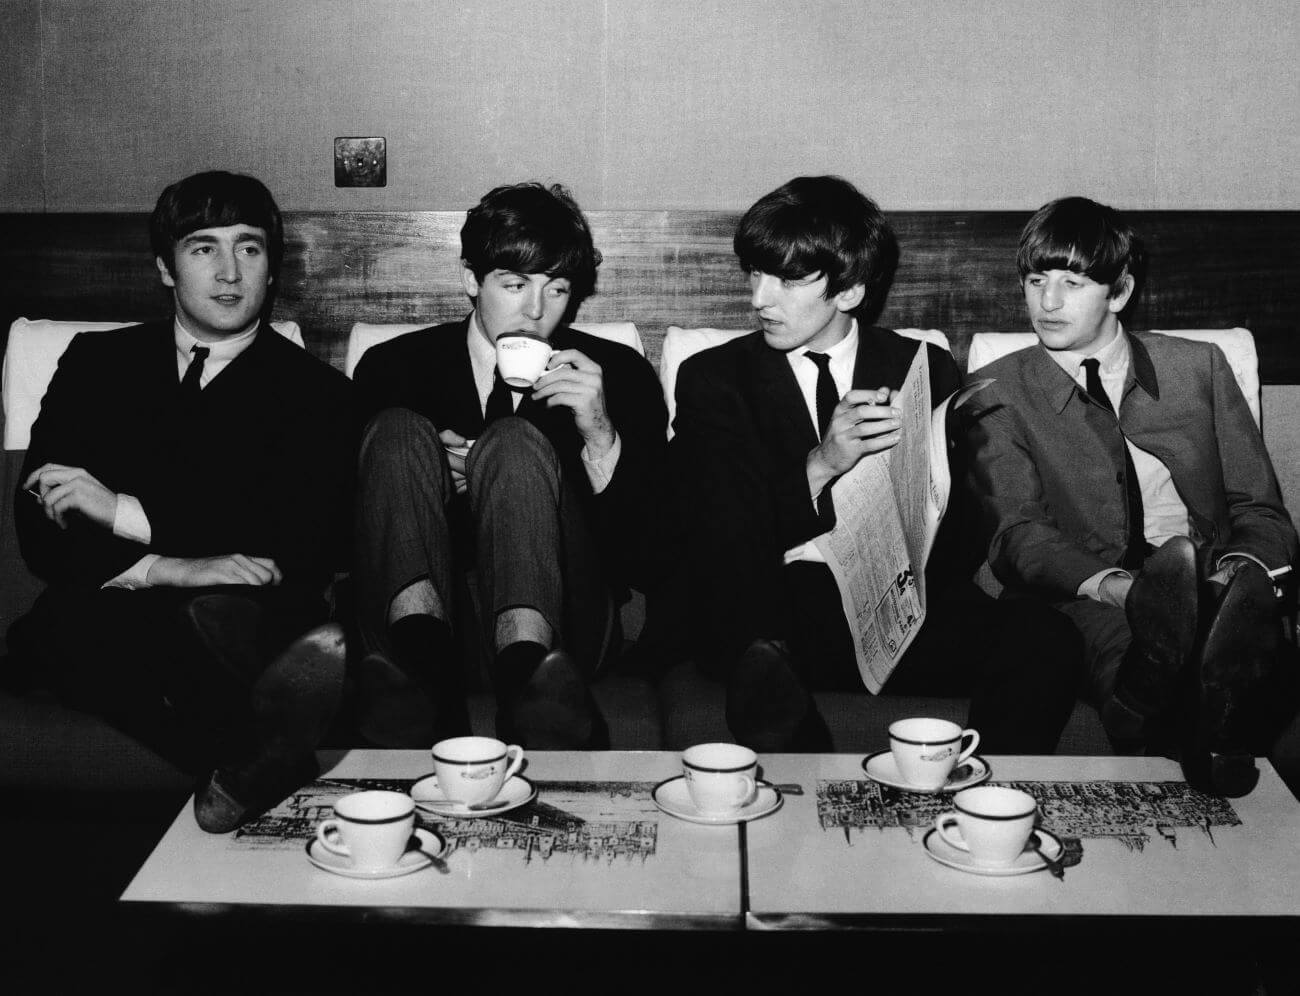 A black and white picture of John Lennon, Paul McCartney, George Harrison and Ringo Starr of The Beatles sitting on a couch in front of a table full of tea cups. Harrison holds a newspaper.